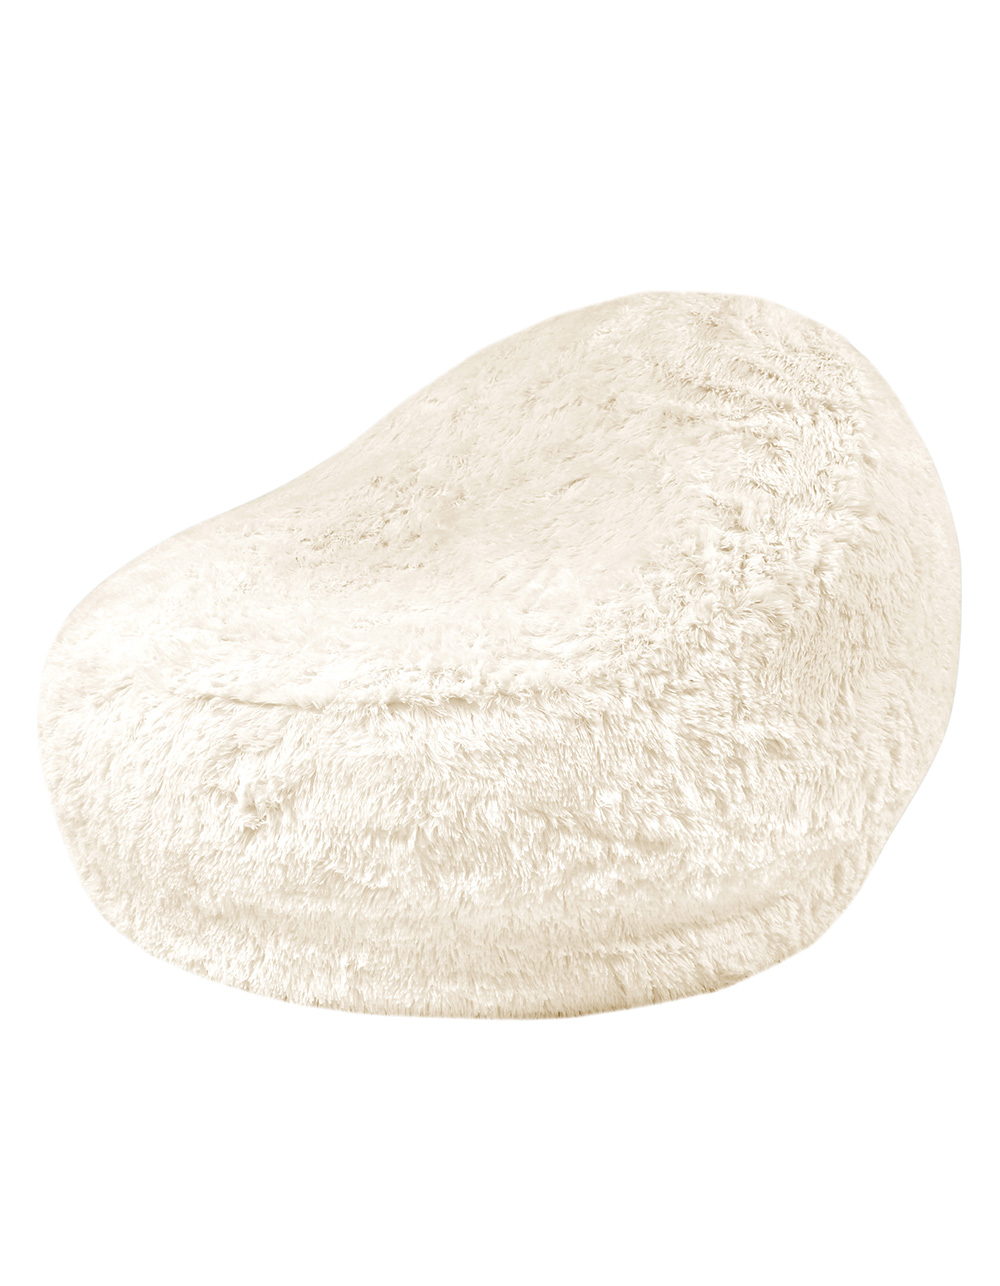 AIRCANDY Mongolian Faux Fur Inflatable Chair